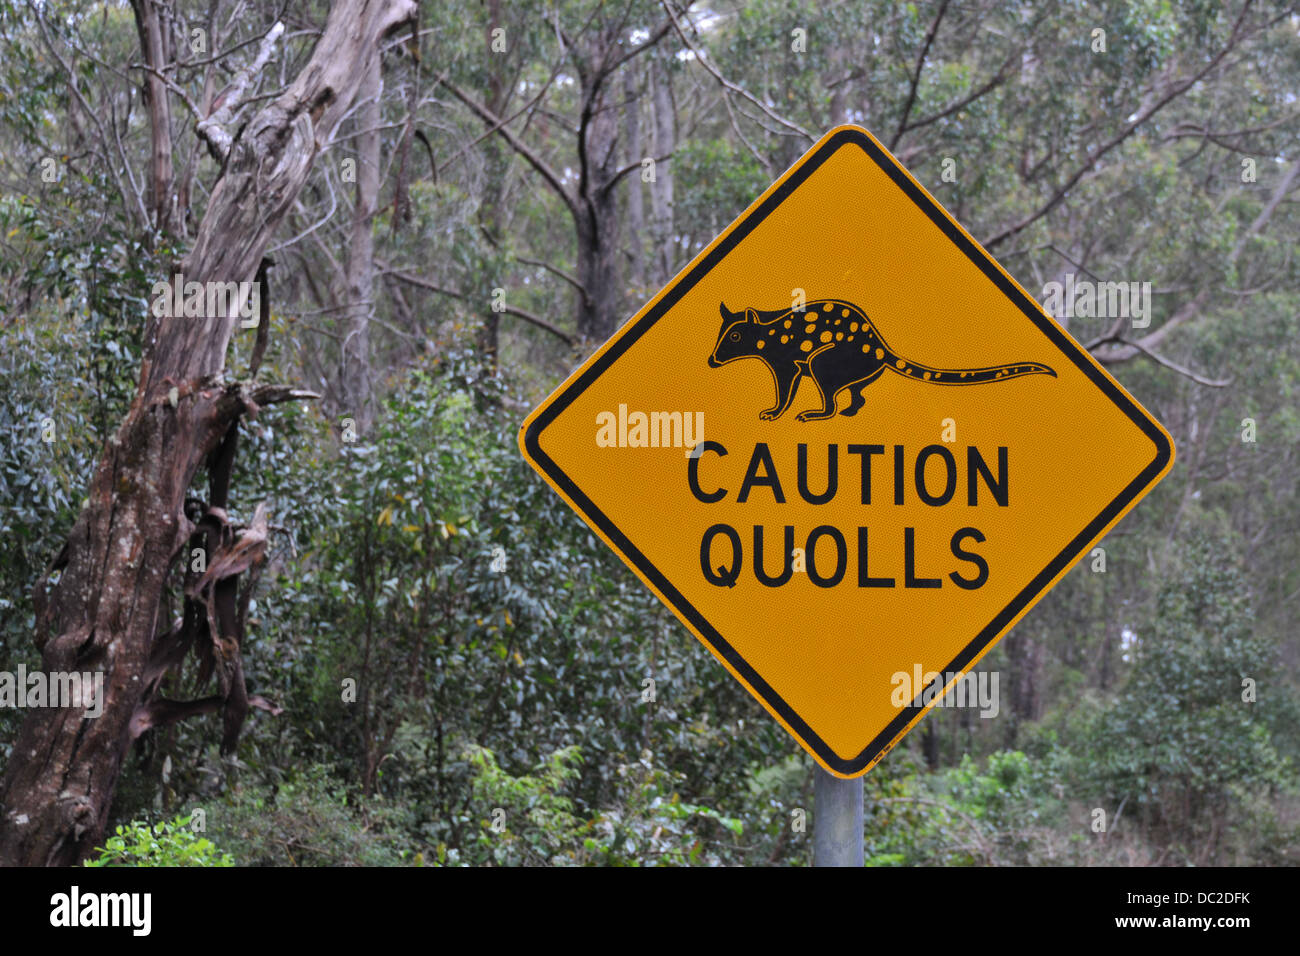 road sign in quoll habitat in Northern New South Wales, Australia Stock Photo